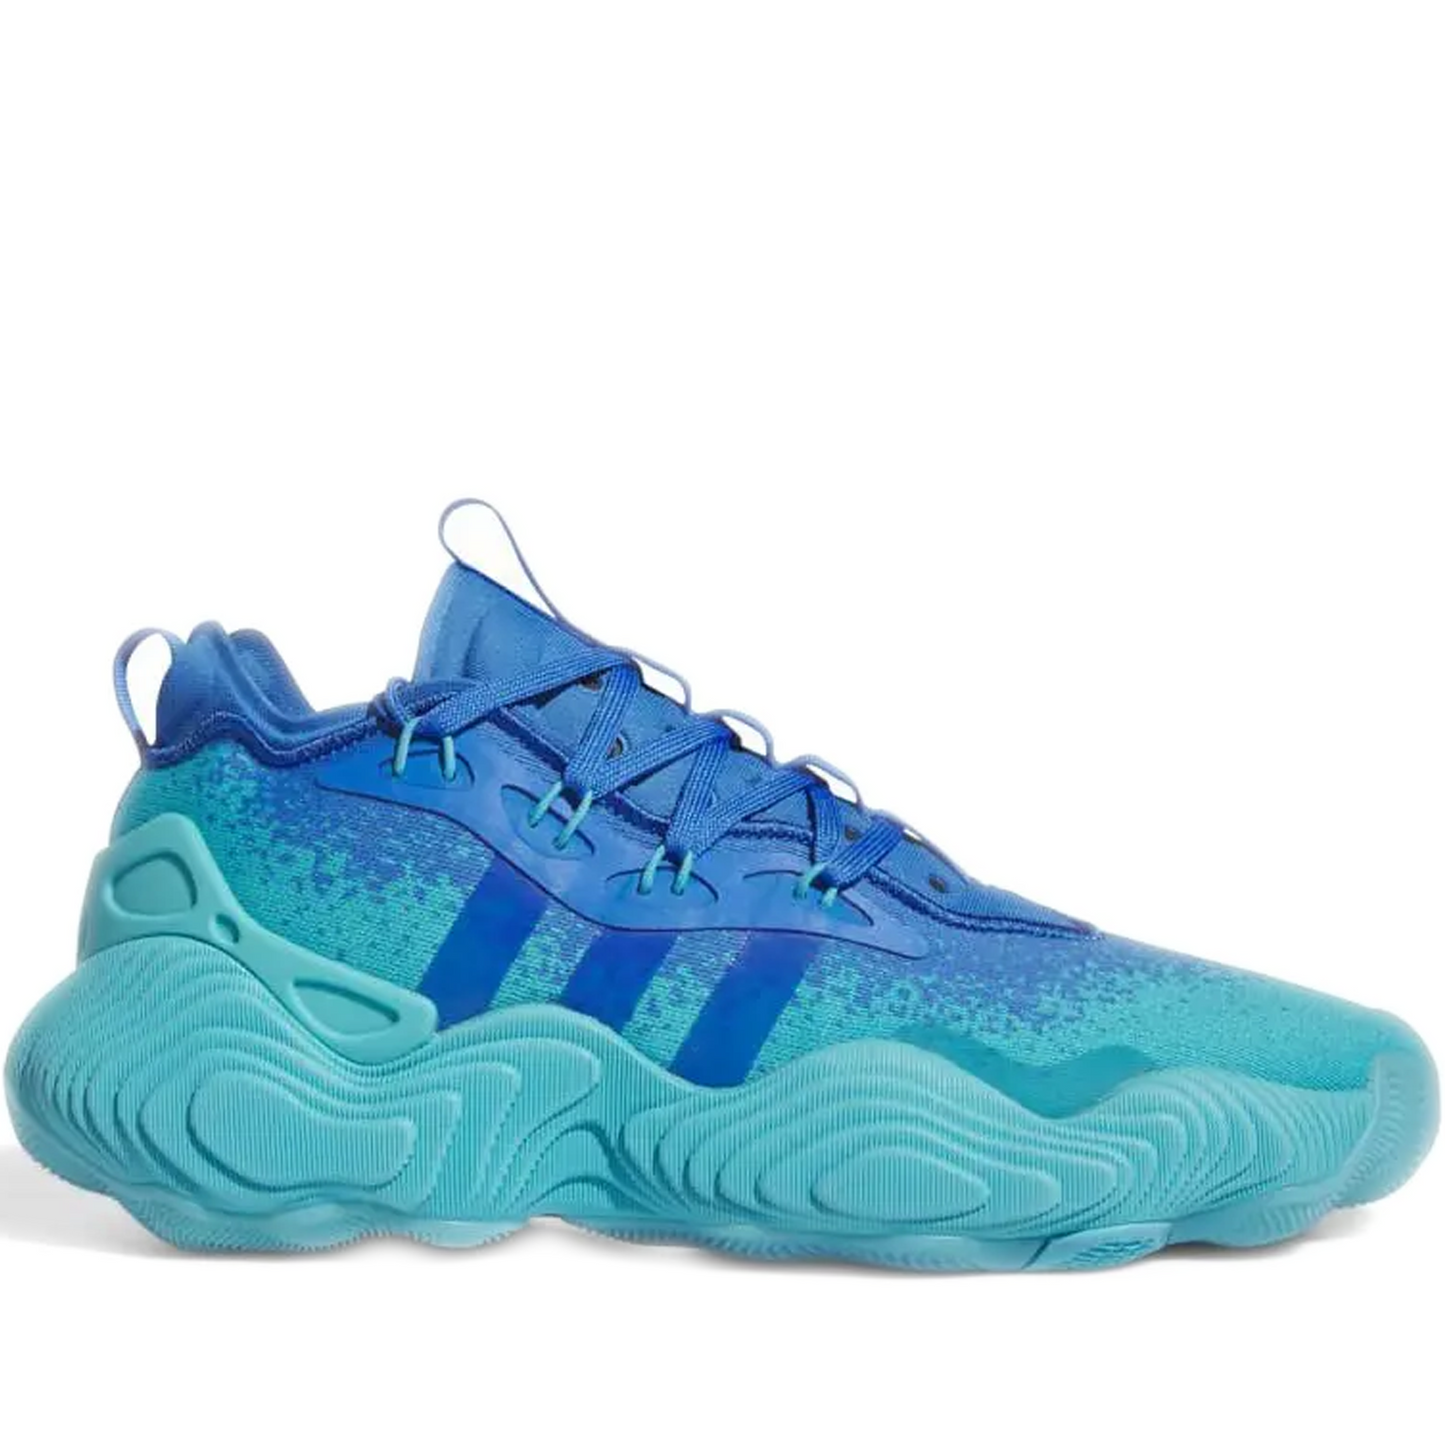 Men's Adidas Trae Young 3 Basketball Shoes - Bright Blue